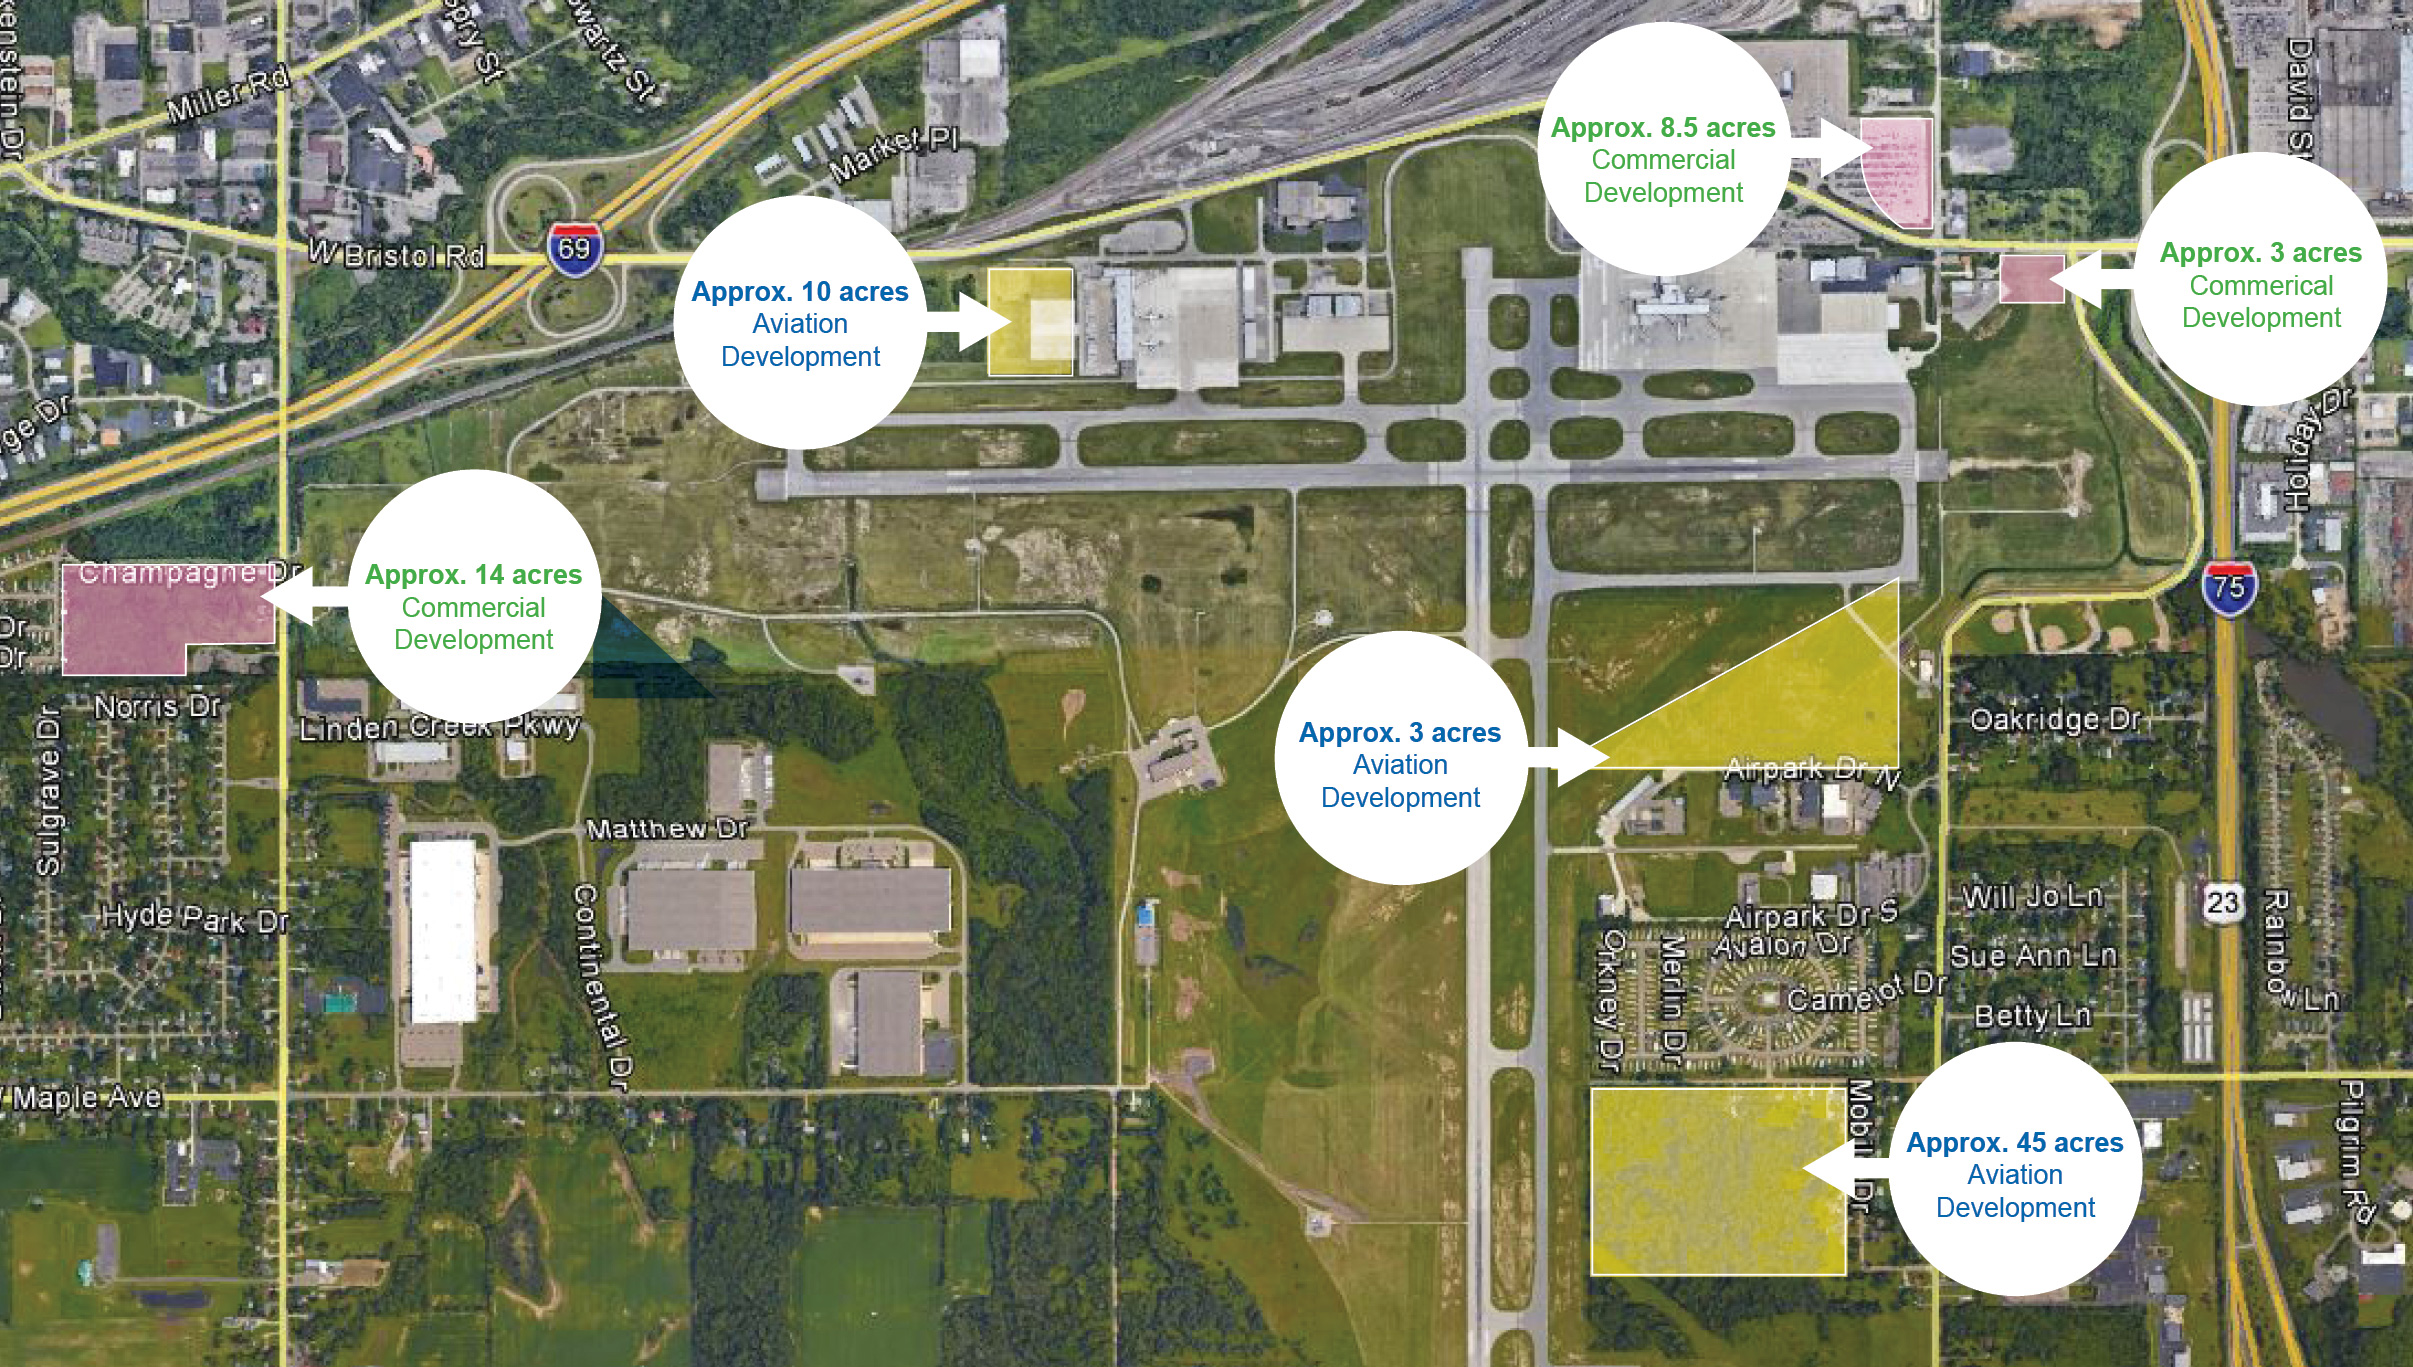 A google map overview. From left to right. The first bubble shows a potential property approximately 14 acres of commercial development. Next to that, another bubble shows approximately 10 acres of aviation development right by the runway. Below that is another bubble that say approximately 3 acres of aviation development also next to the runway. Above that, approximately 8.5 acres of commercial development. At the bottom of the runway, approximately 45 acres of aviation development. The last bubbles shows approximately 3 acres of commercial development.